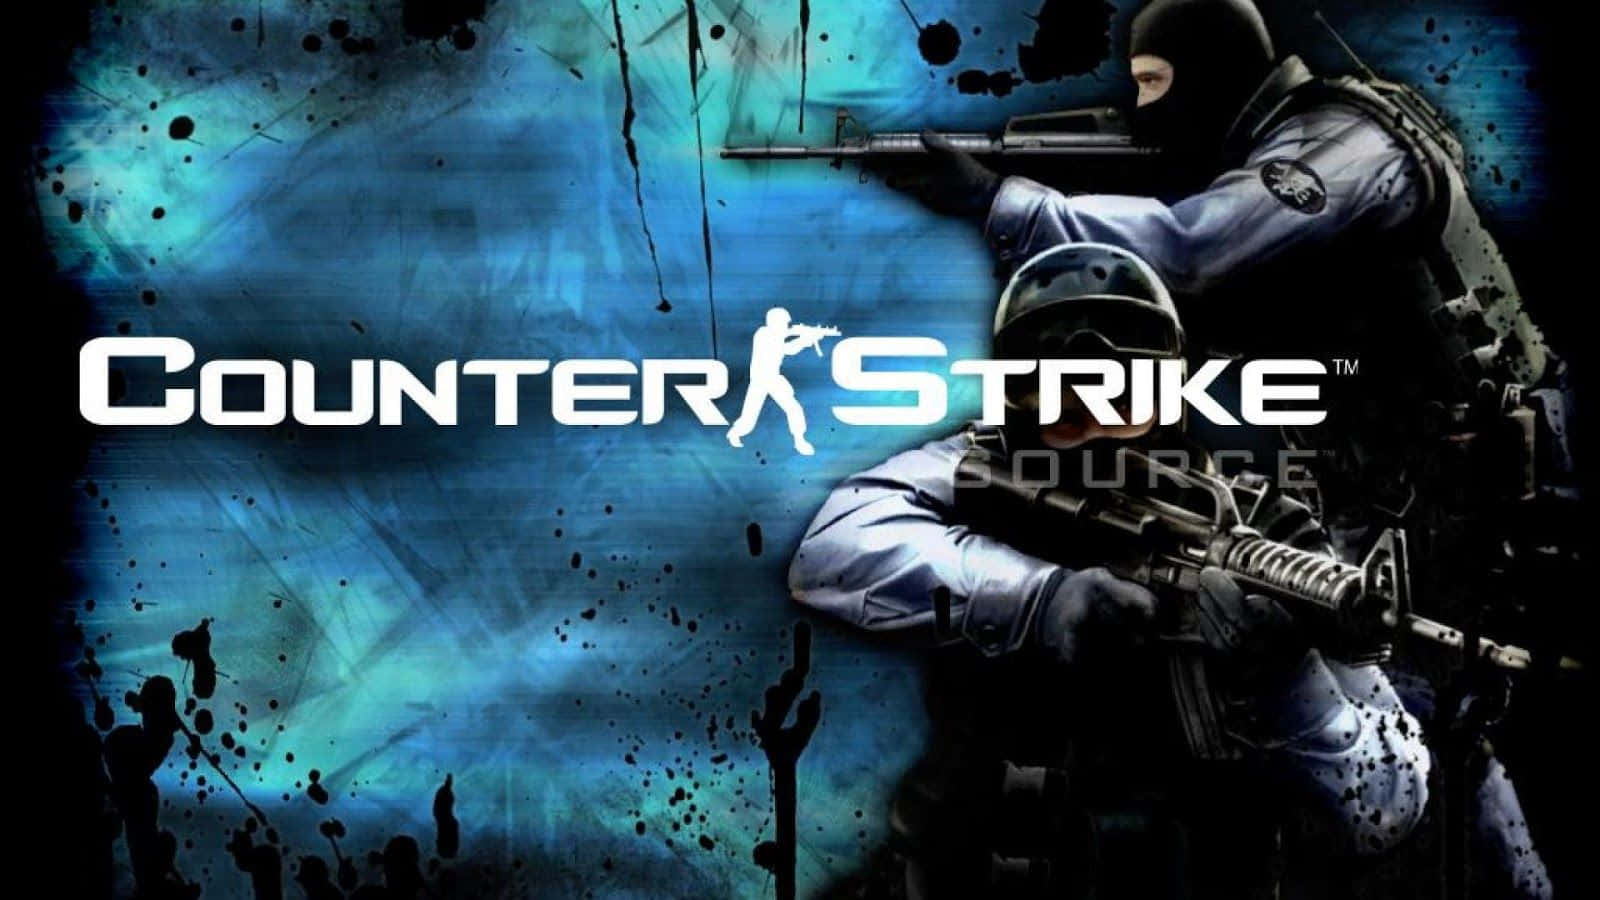 Counterstrike Source Splashy Blue Could Be Translated To Italian As 